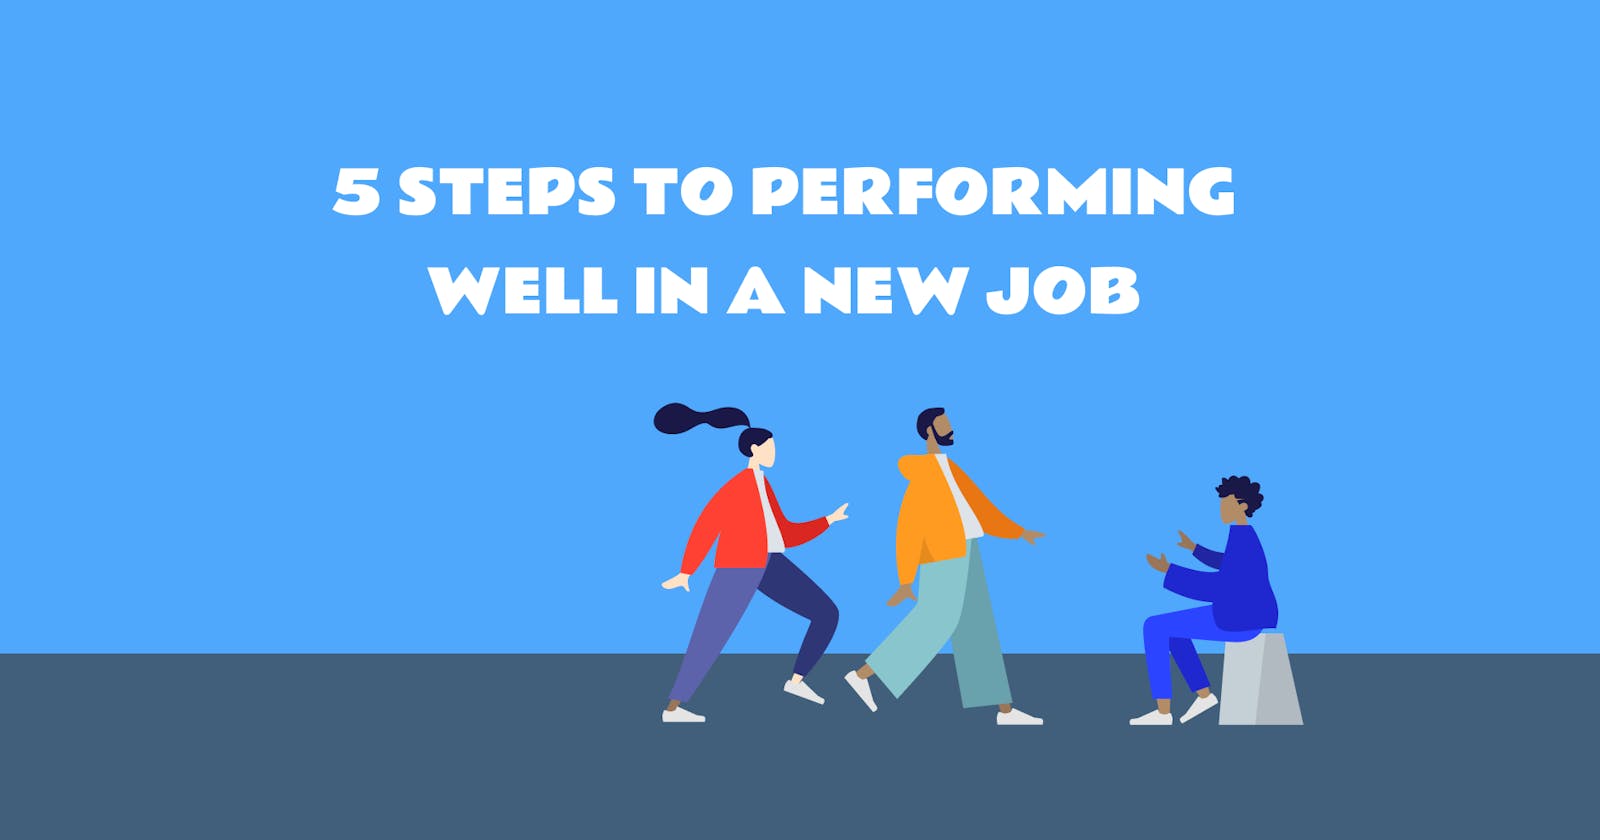 5 steps for performing well in a new job